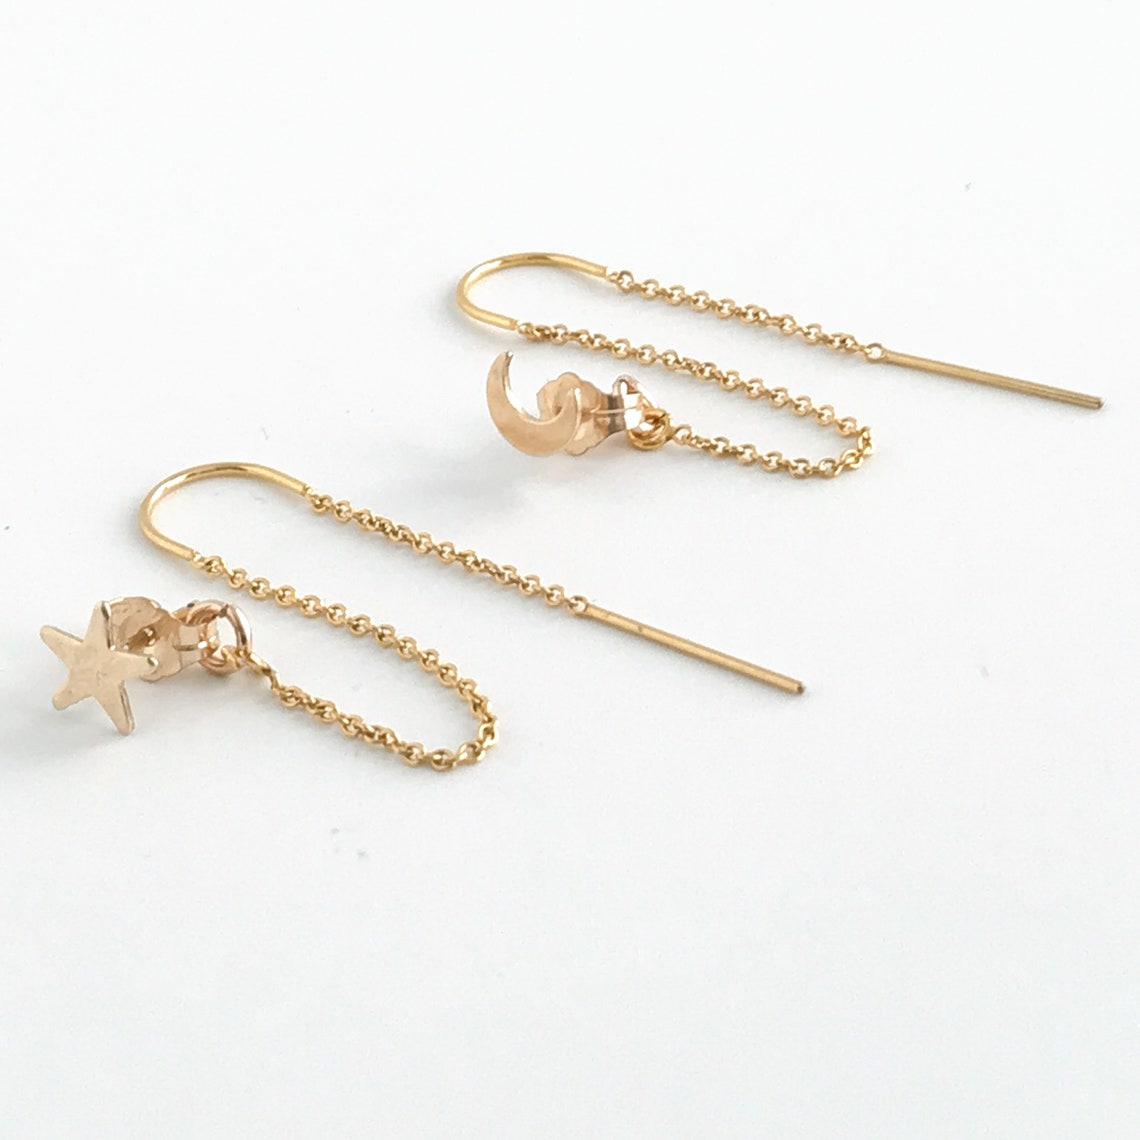 Star and Moon Double Piercing Threader Earrings - 14k Gold Filled